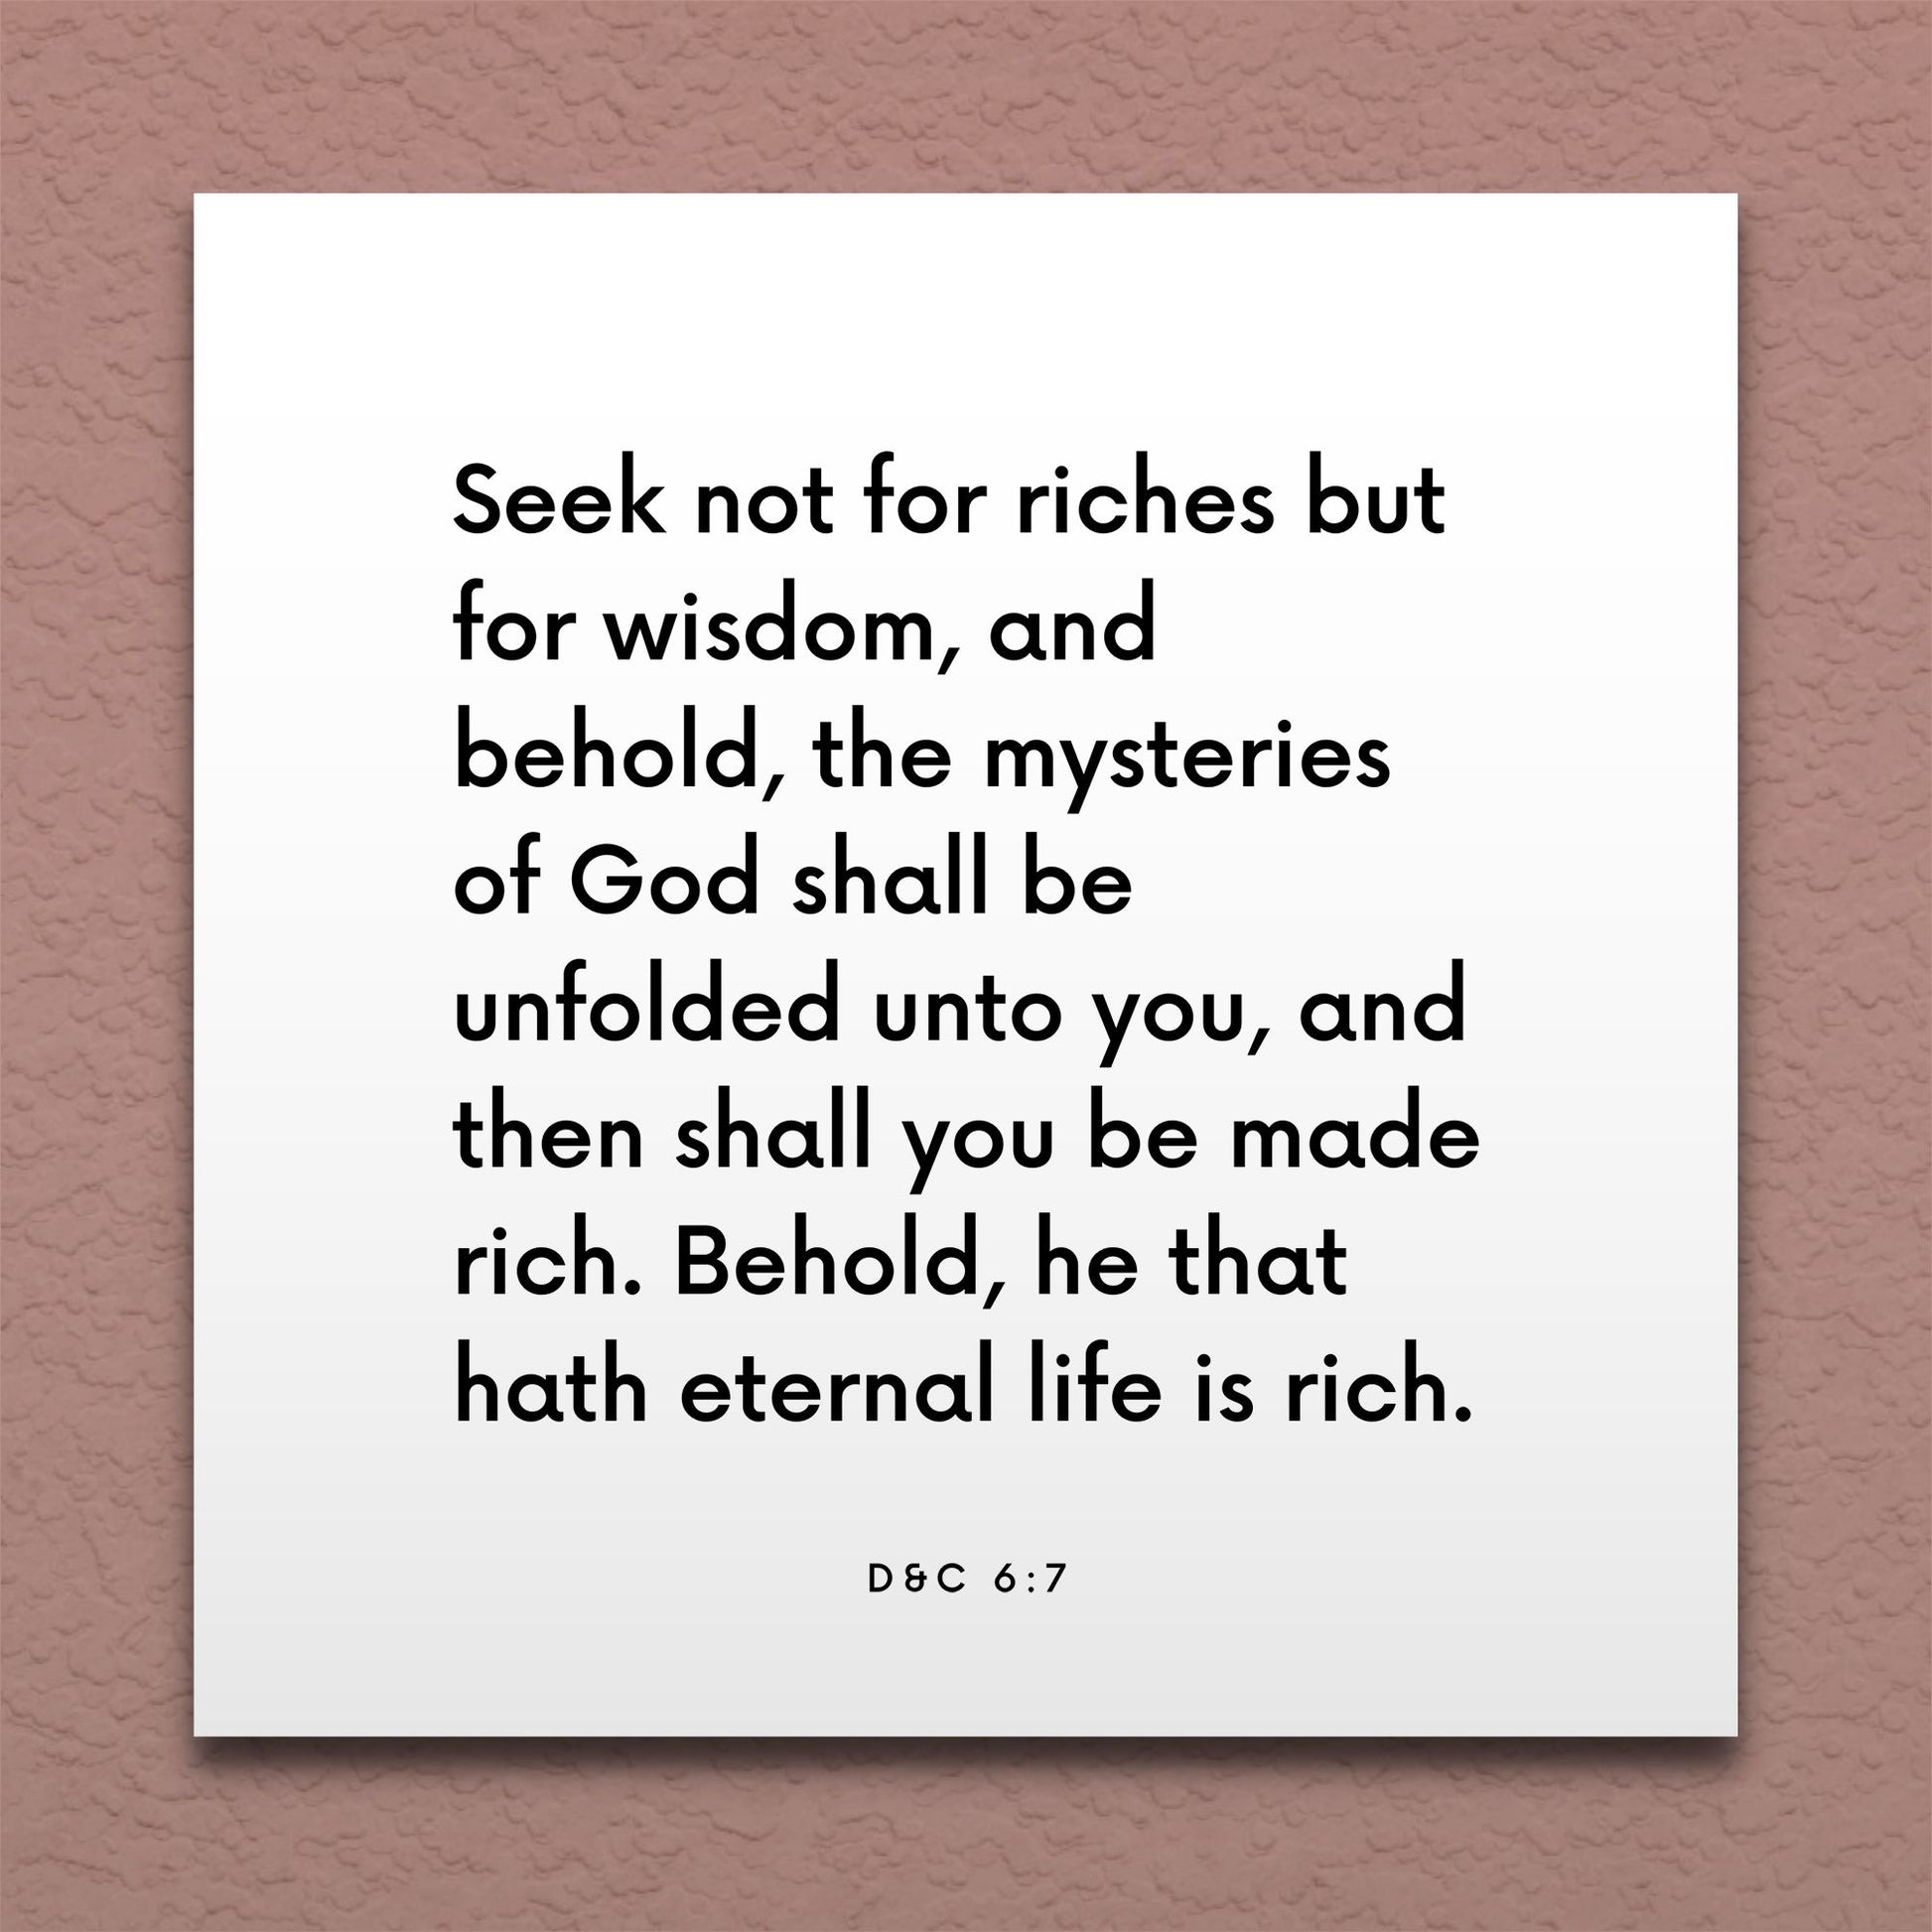 Wall-mounted scripture tile for D&C 6:7 - "Seek not for riches but for wisdom"